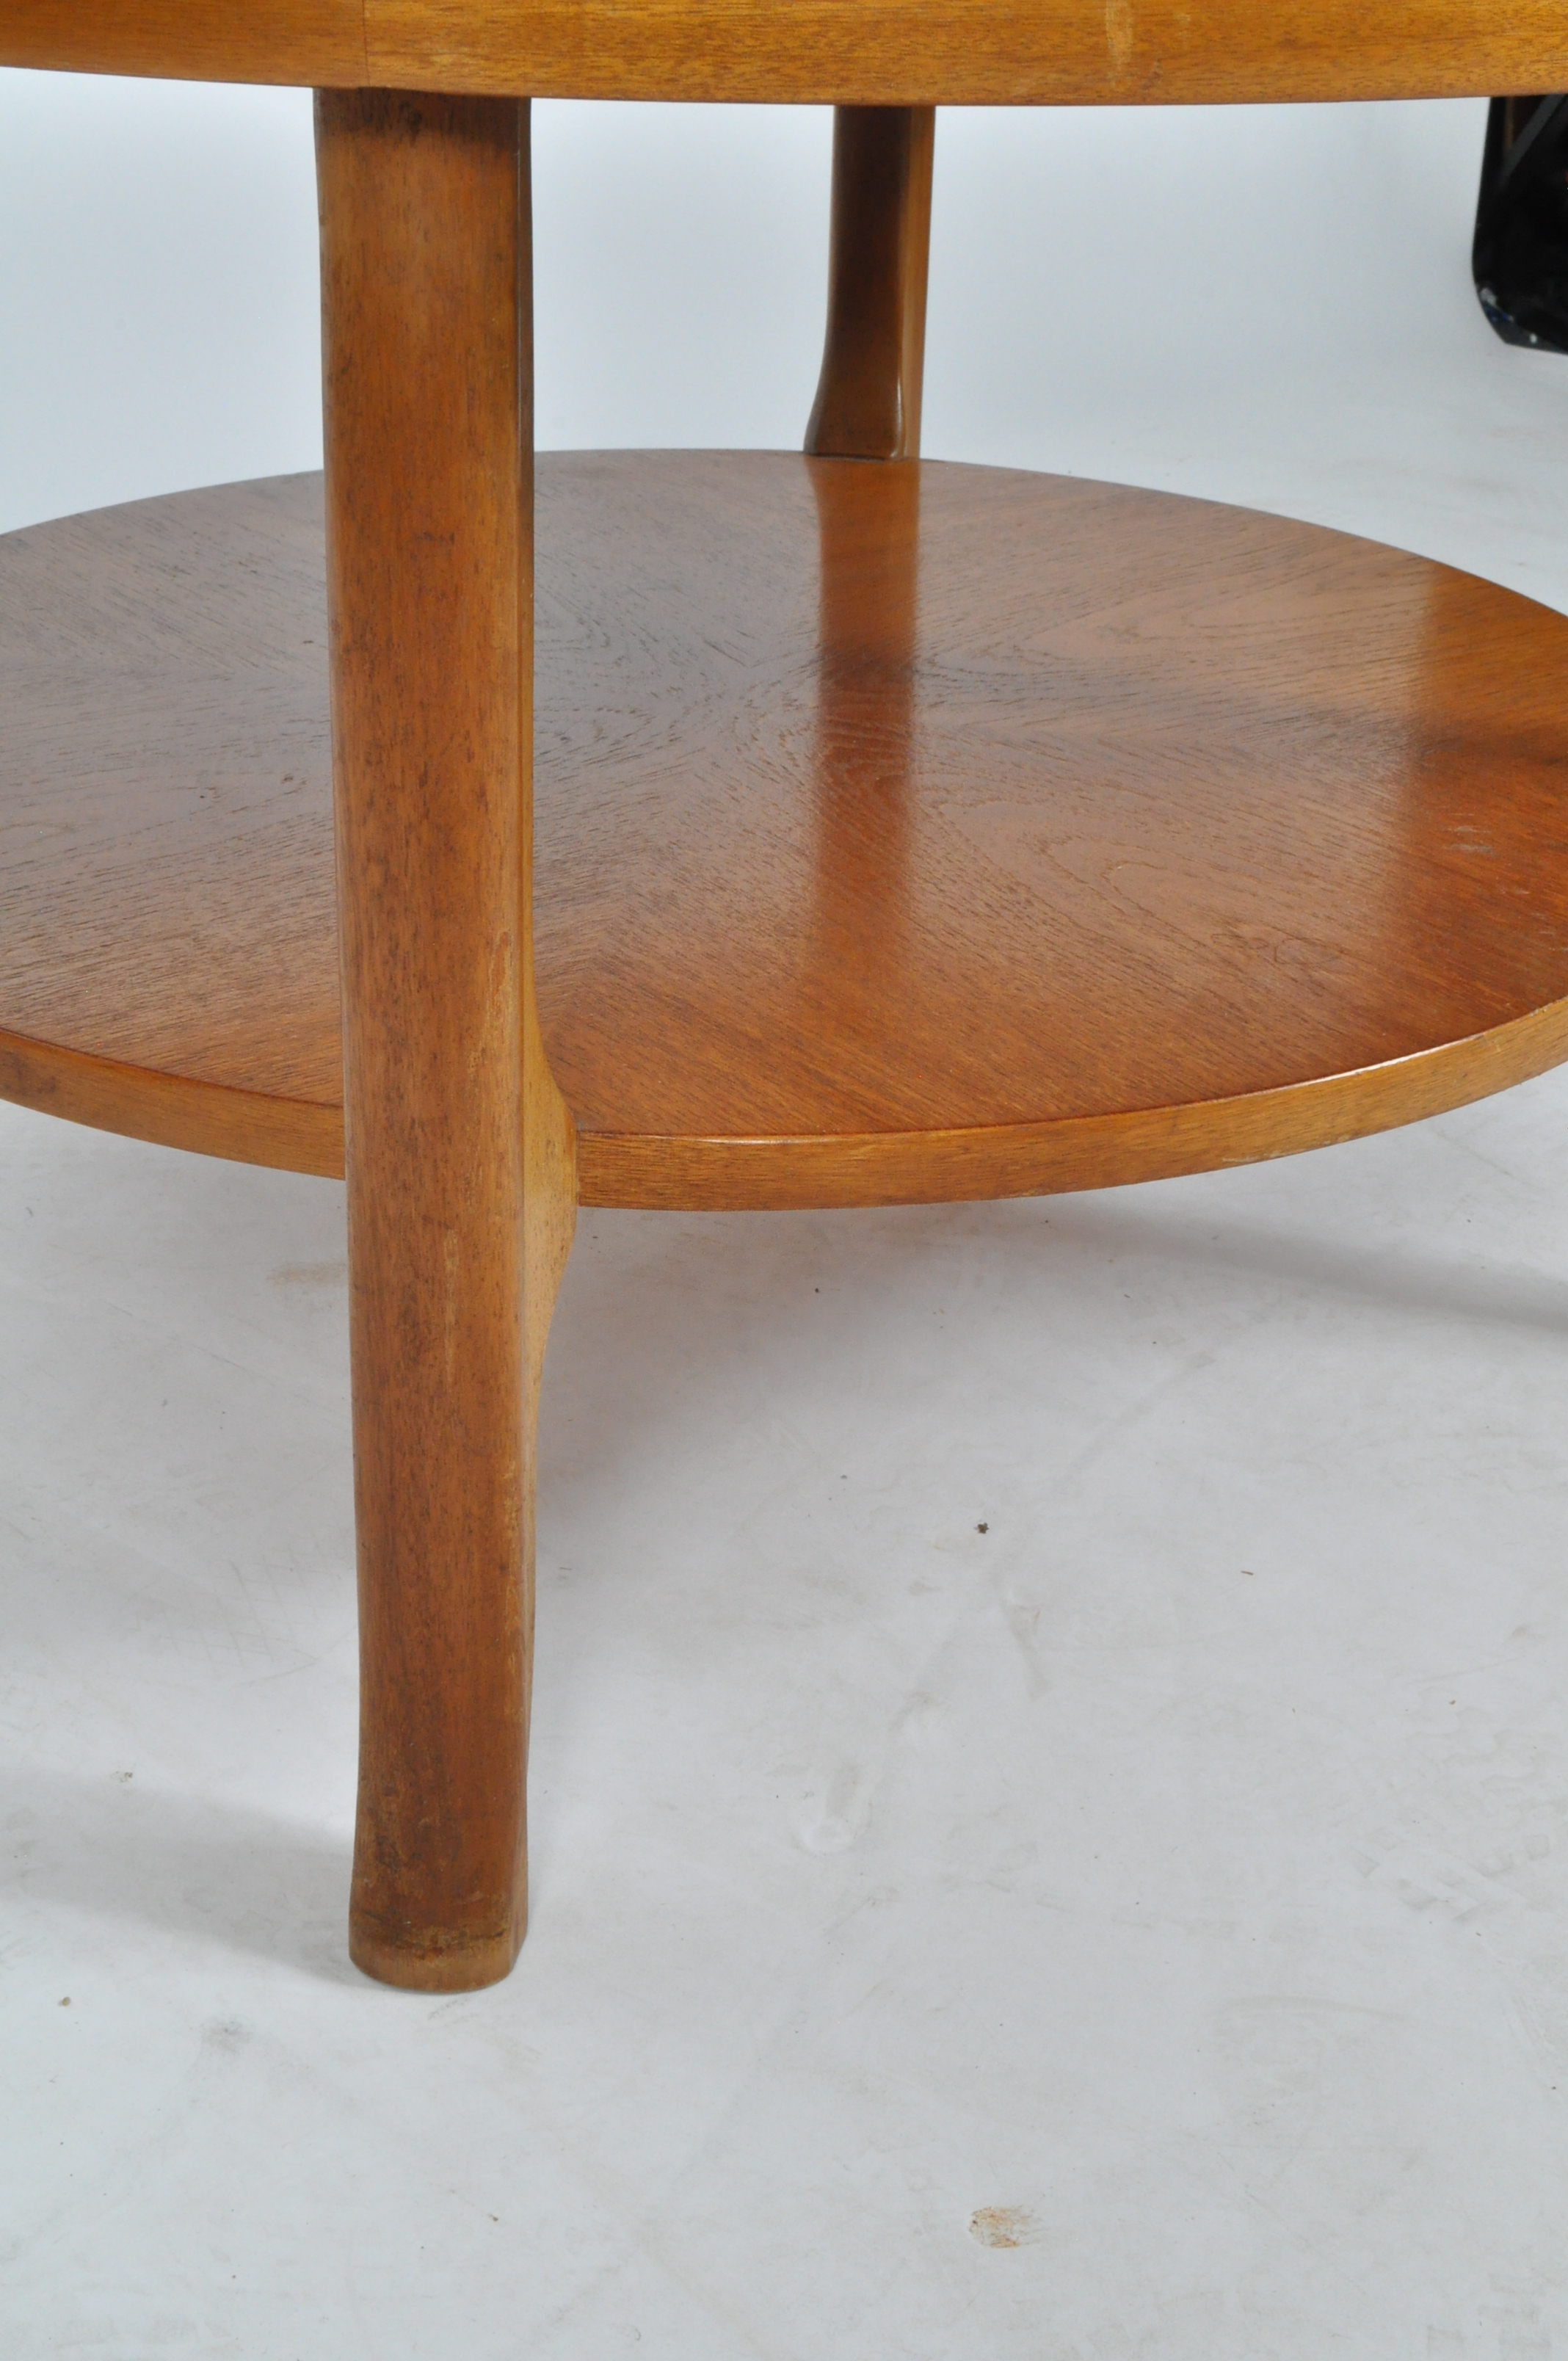 NATHAN MID CENTURY TEAK WOOD TWO TIER COFFEE TABLE - Image 5 of 5